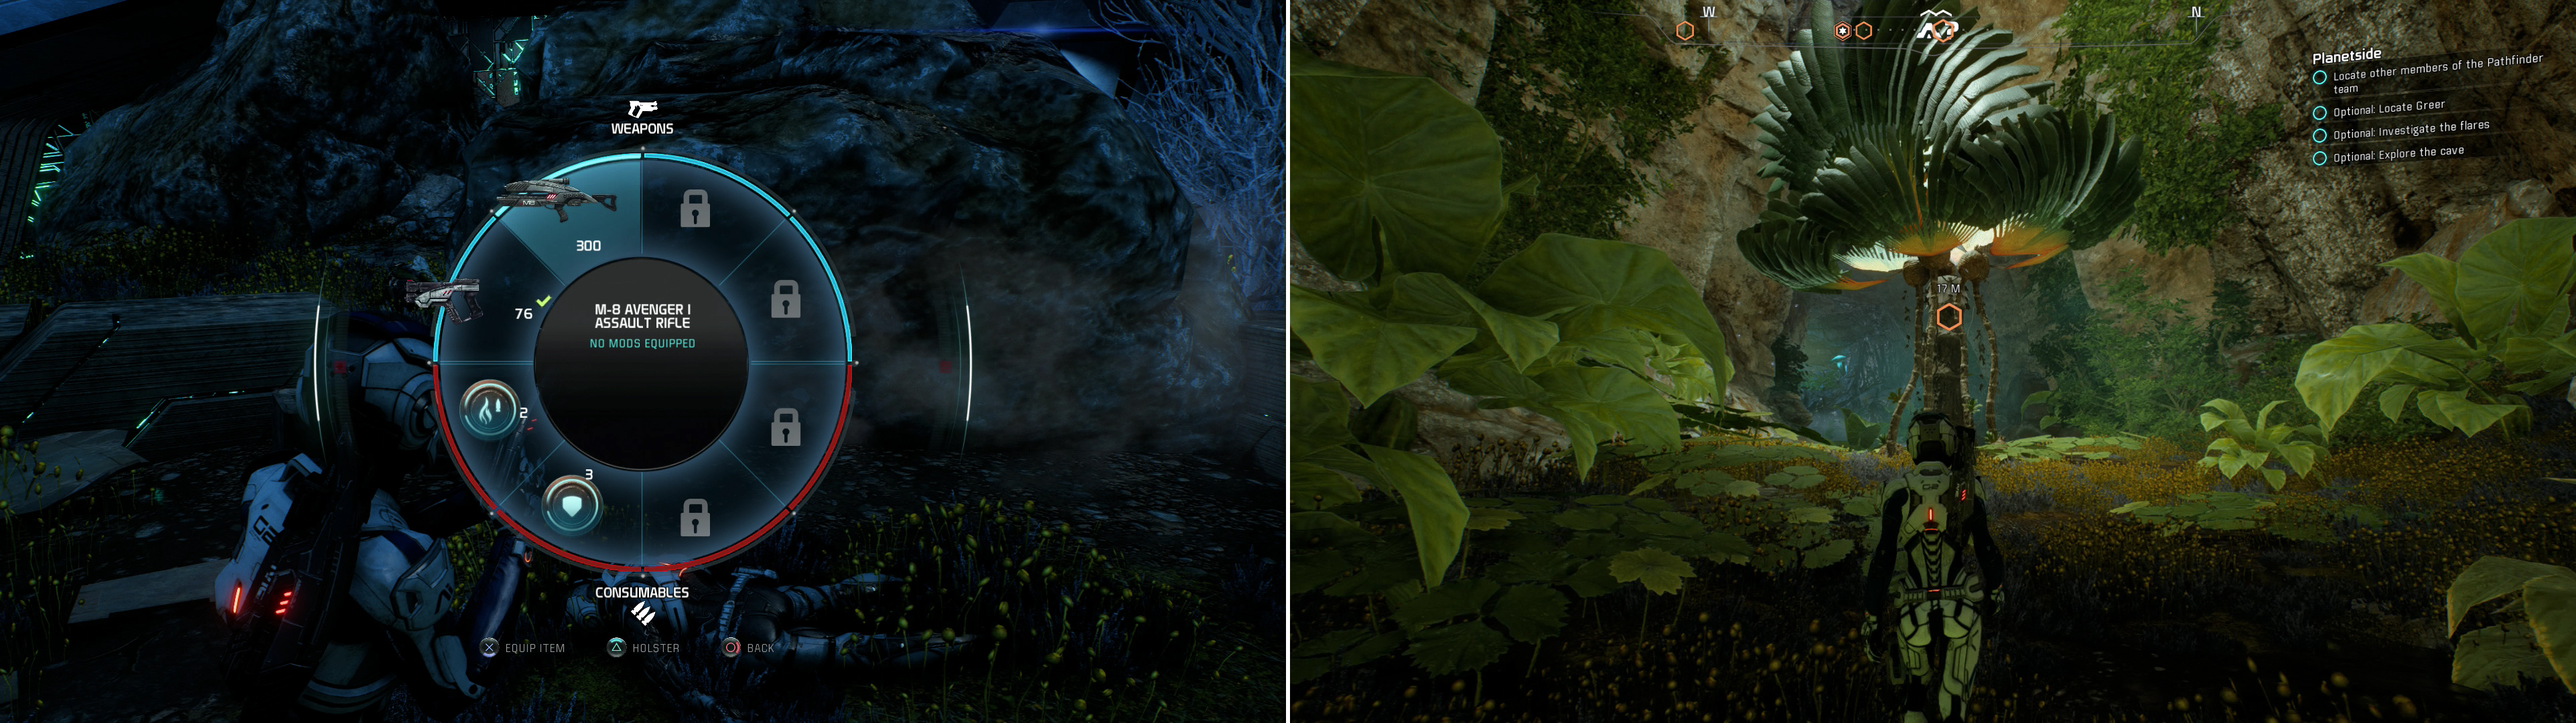 Search Kirklands body for an M-8 Avenger Assault Rifle (left). In a sheltered cave youll be able to catch a glimpse of Habitat 7 as it once was (right).